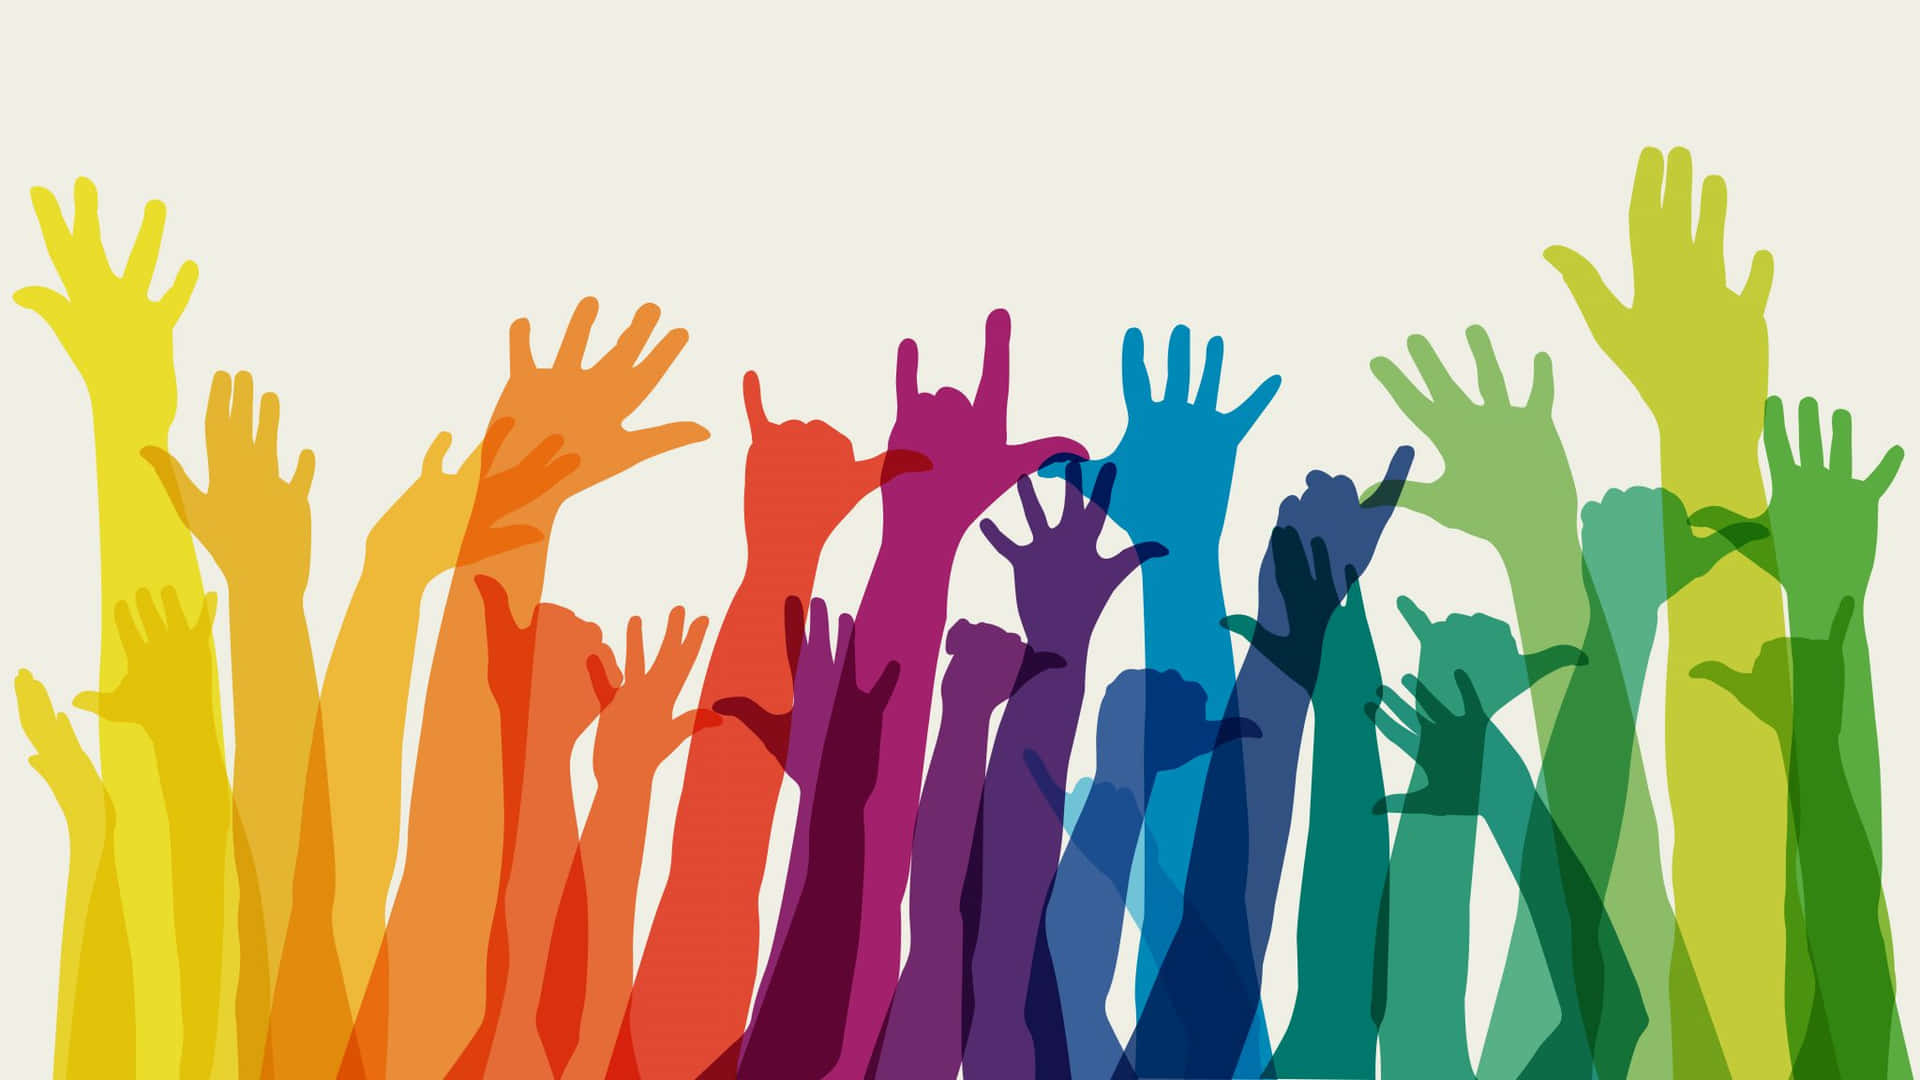 Inclusive Colorful Hands Painting Wallpaper